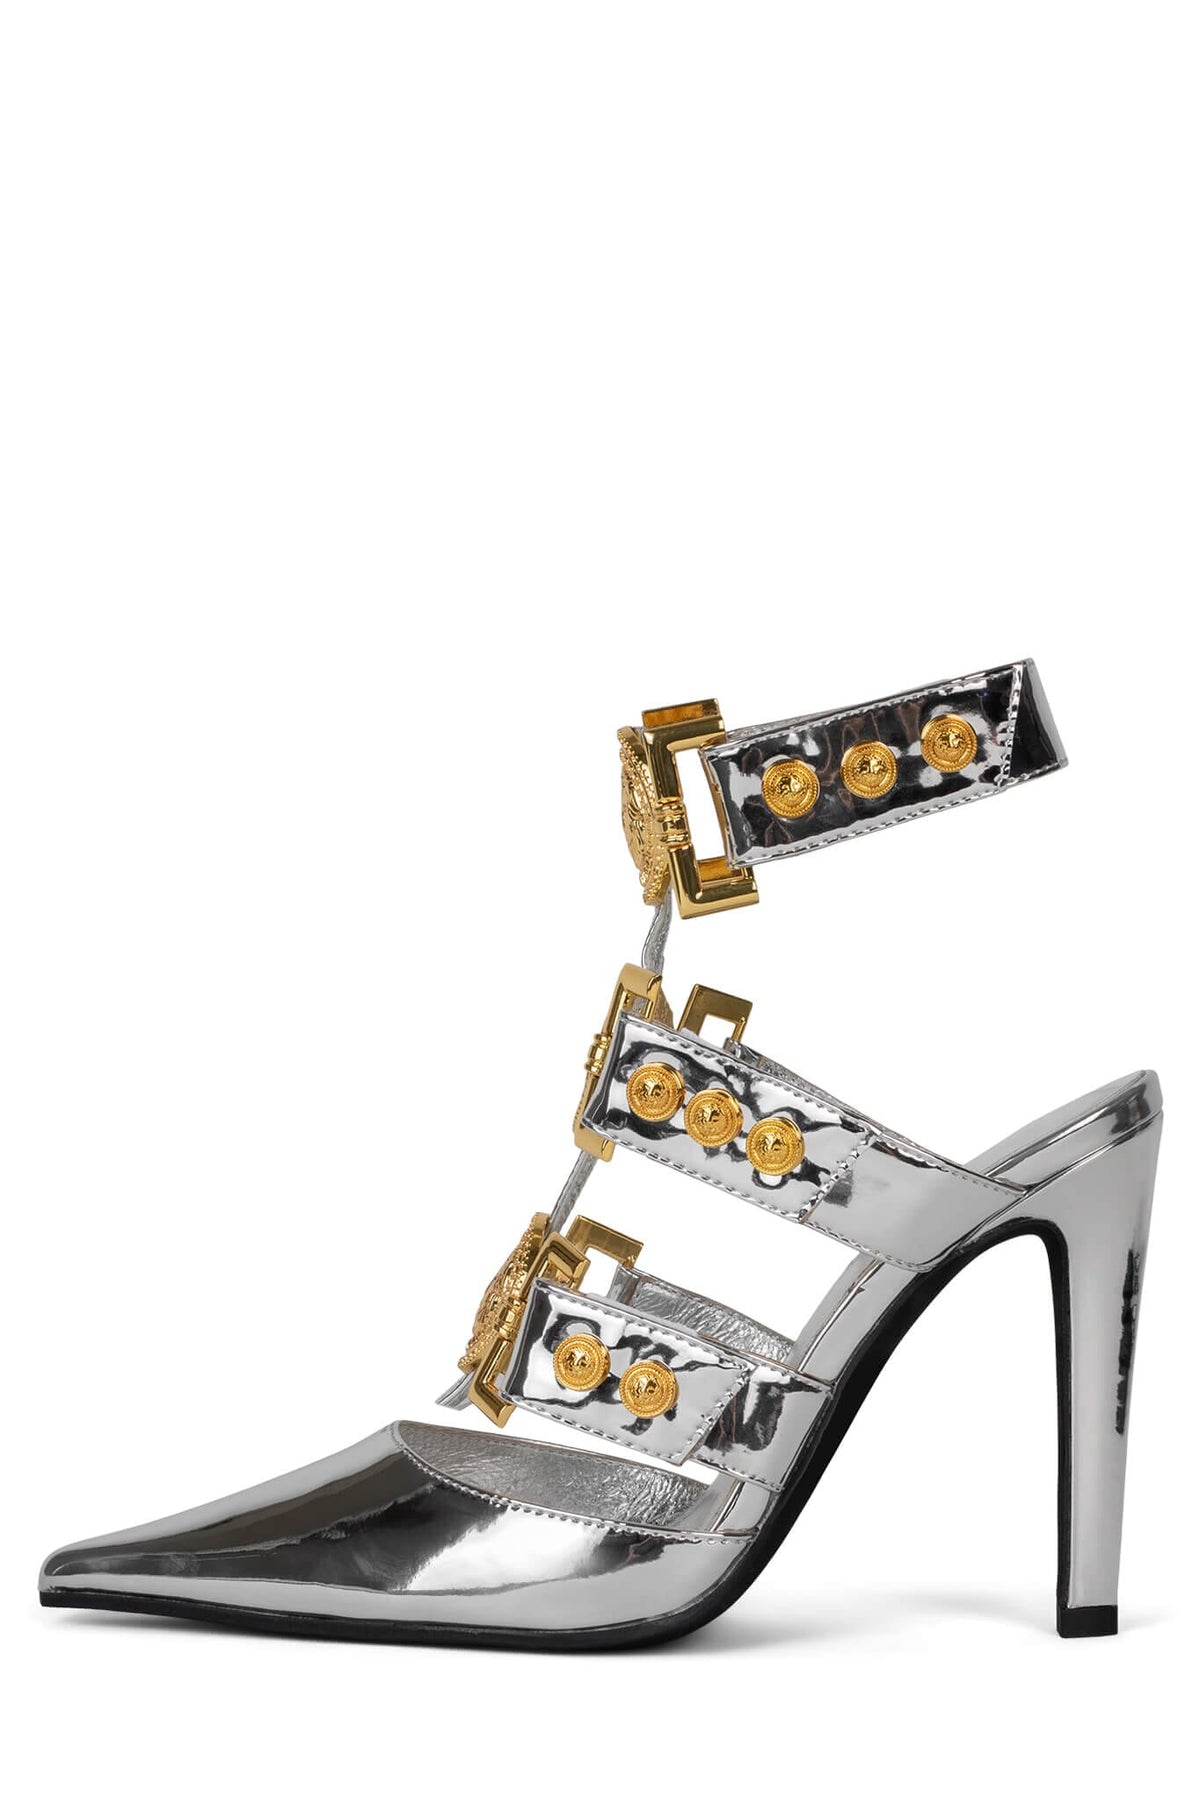 LIONNESS Jeffrey Campbell Strappy Heeled Mule Silver Mirror Gold